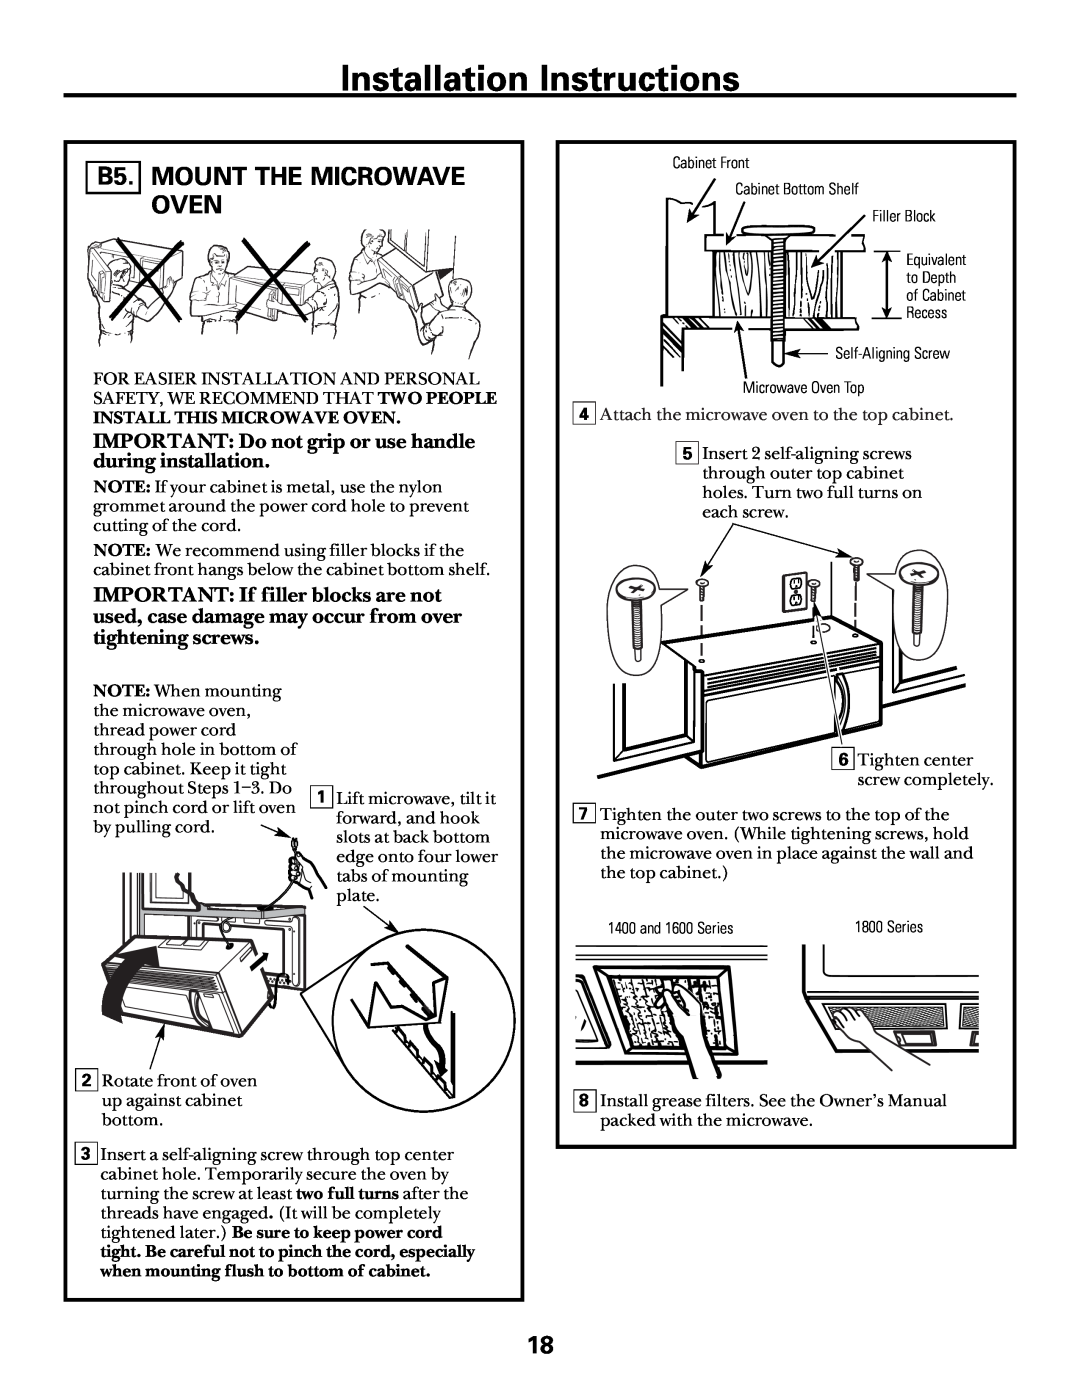 GE Over the Range Microwave Oven manual B5. MOUNT THE MICROWAVE OVEN, Installation Instructions 